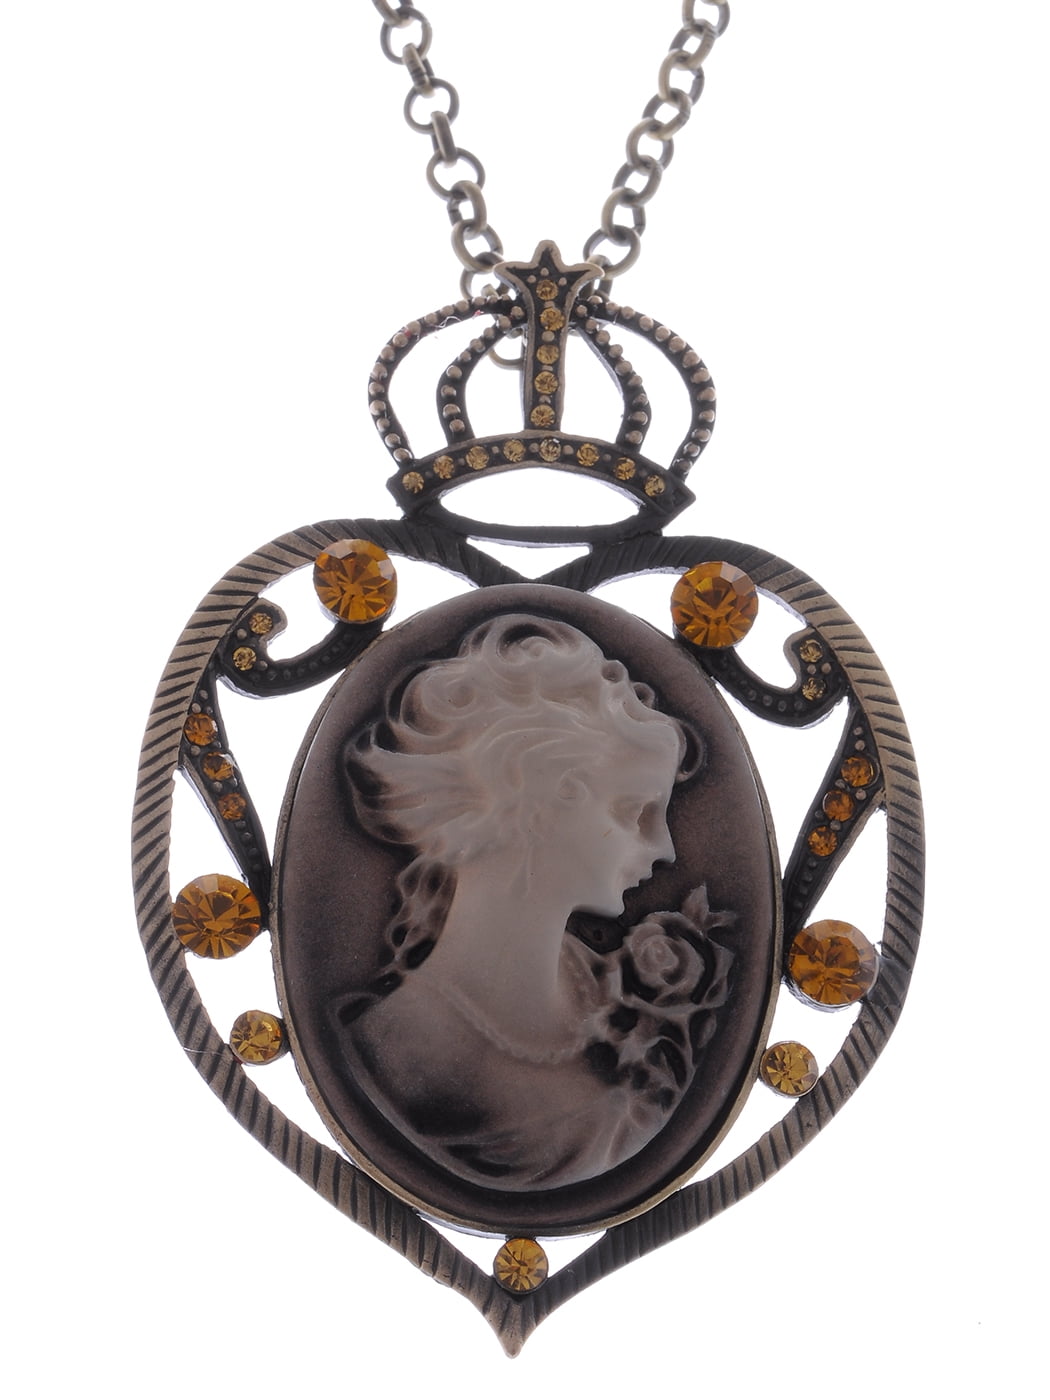 Ladies Cameo Necklace Victorian Lady Cameo 18" chain REDUCED TO CLEAR STOCK 